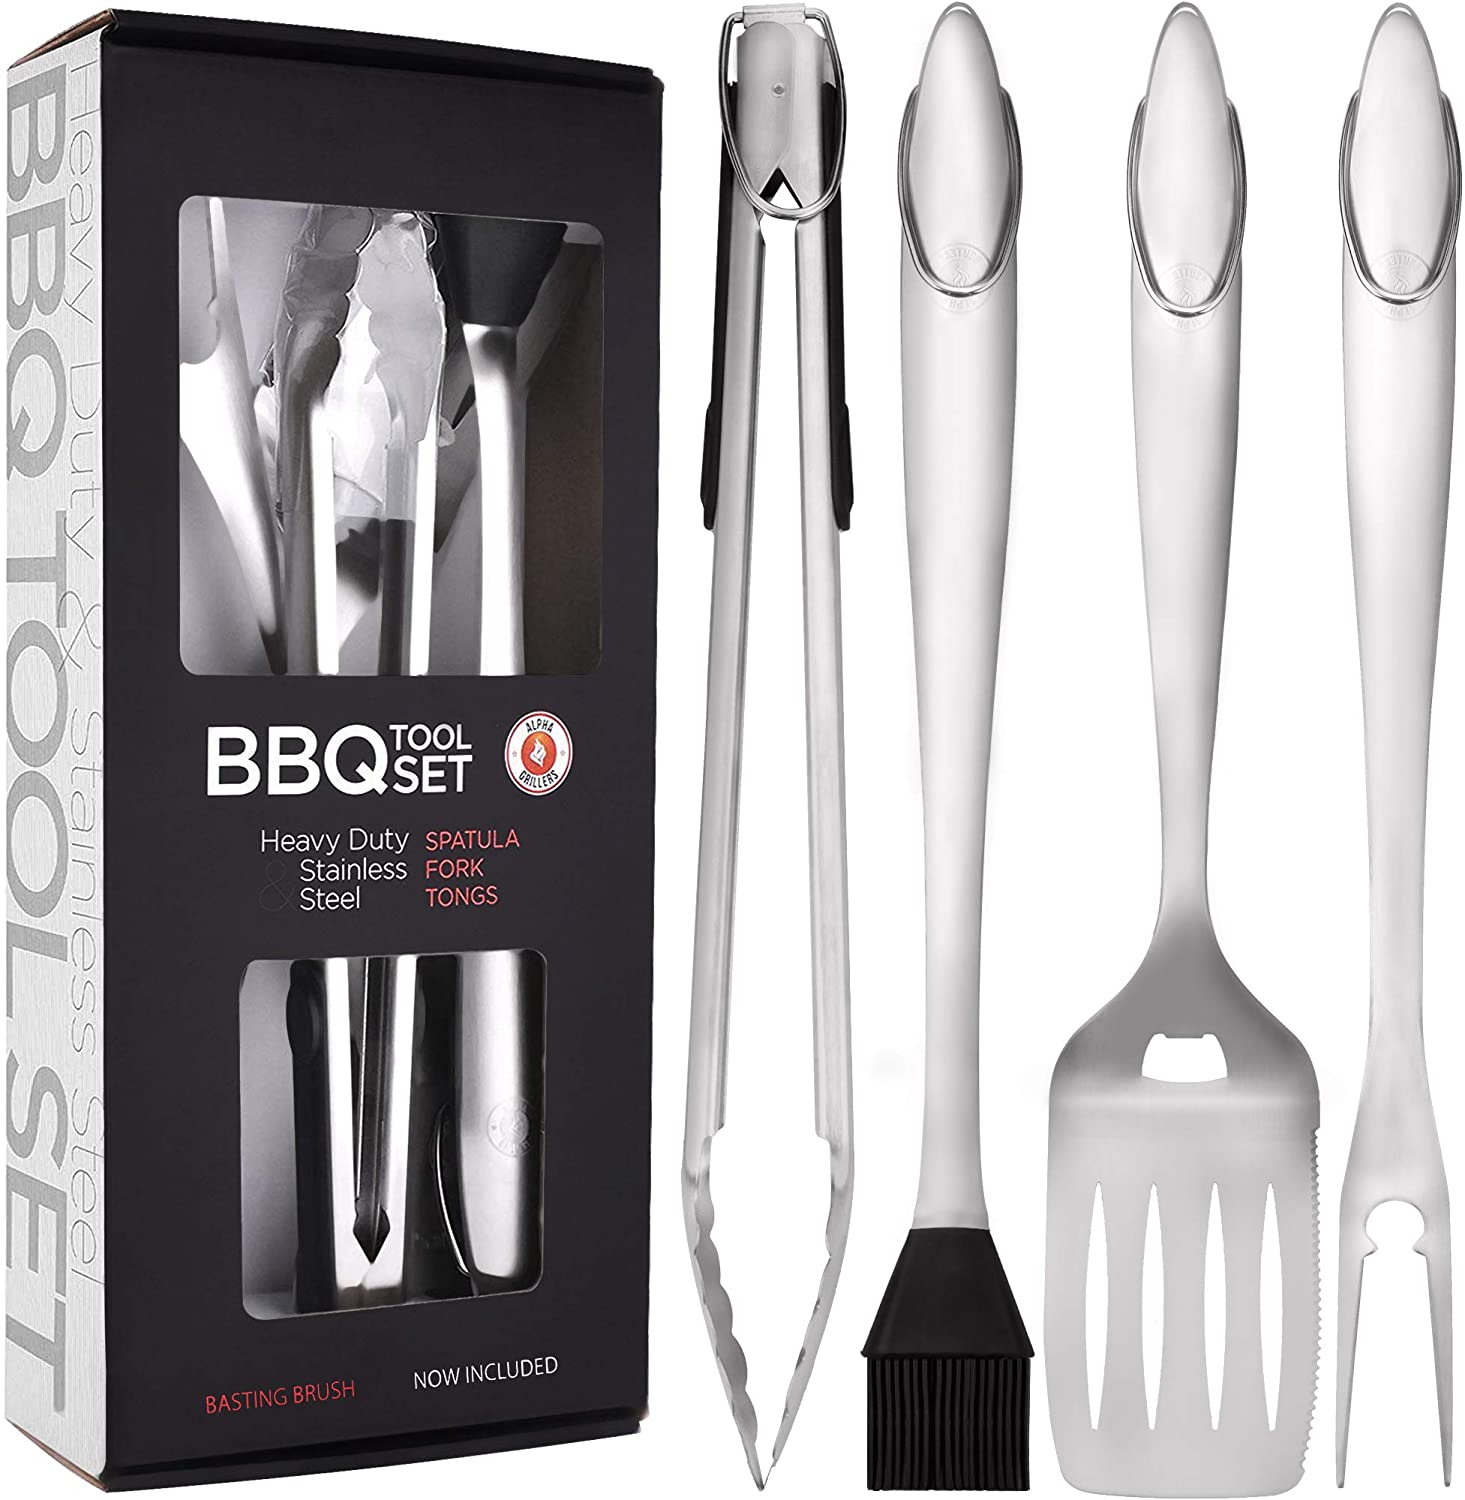 Heavy Duty BBQ Grilling Tools Set. Extra Thick Stainless Steel Spatula, Fork, Basting Brush & Tongs. Gift Box Package. Best for Barbecue & Grill. 18 Inch Utensils Turner Accessories - image 1 of 3